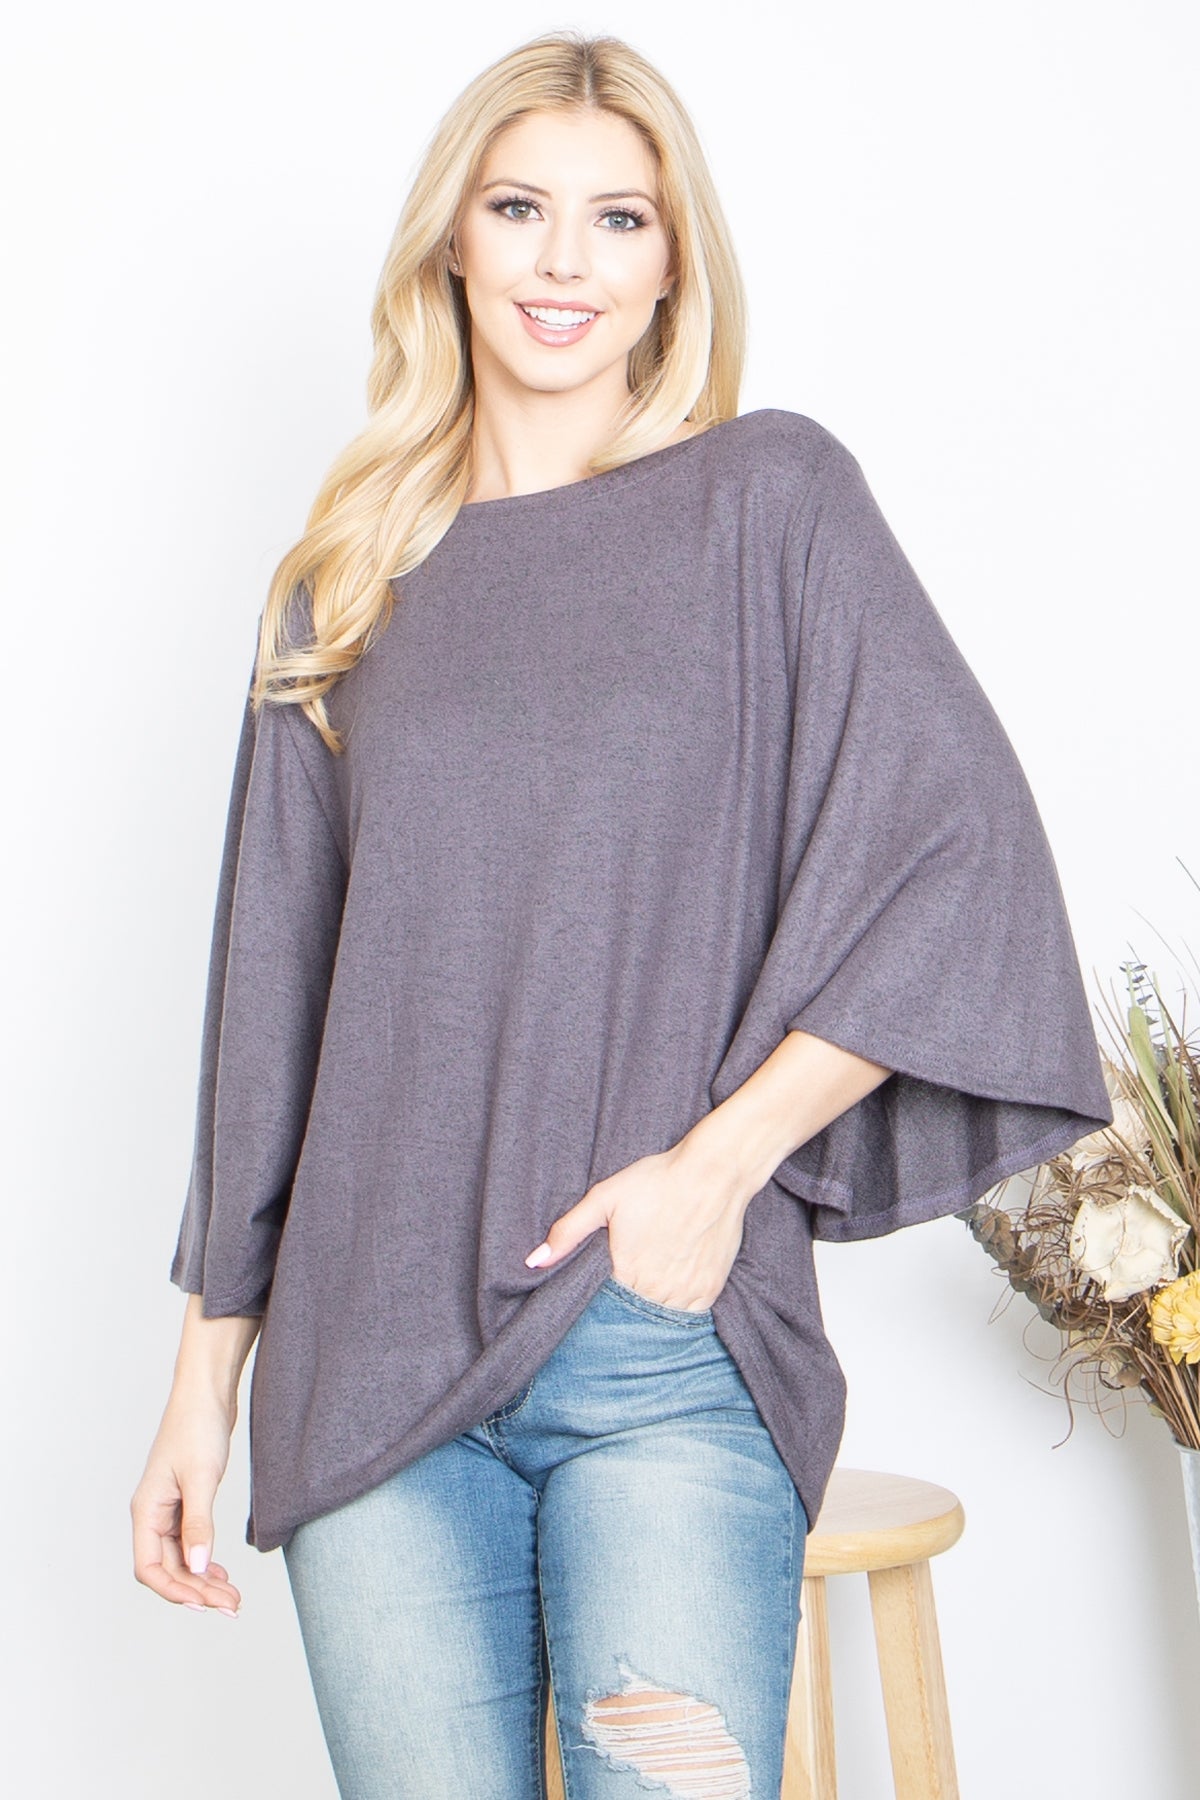 BOAT NECK BELL SLEEVE SOLID HACCI BRUSHED TOP